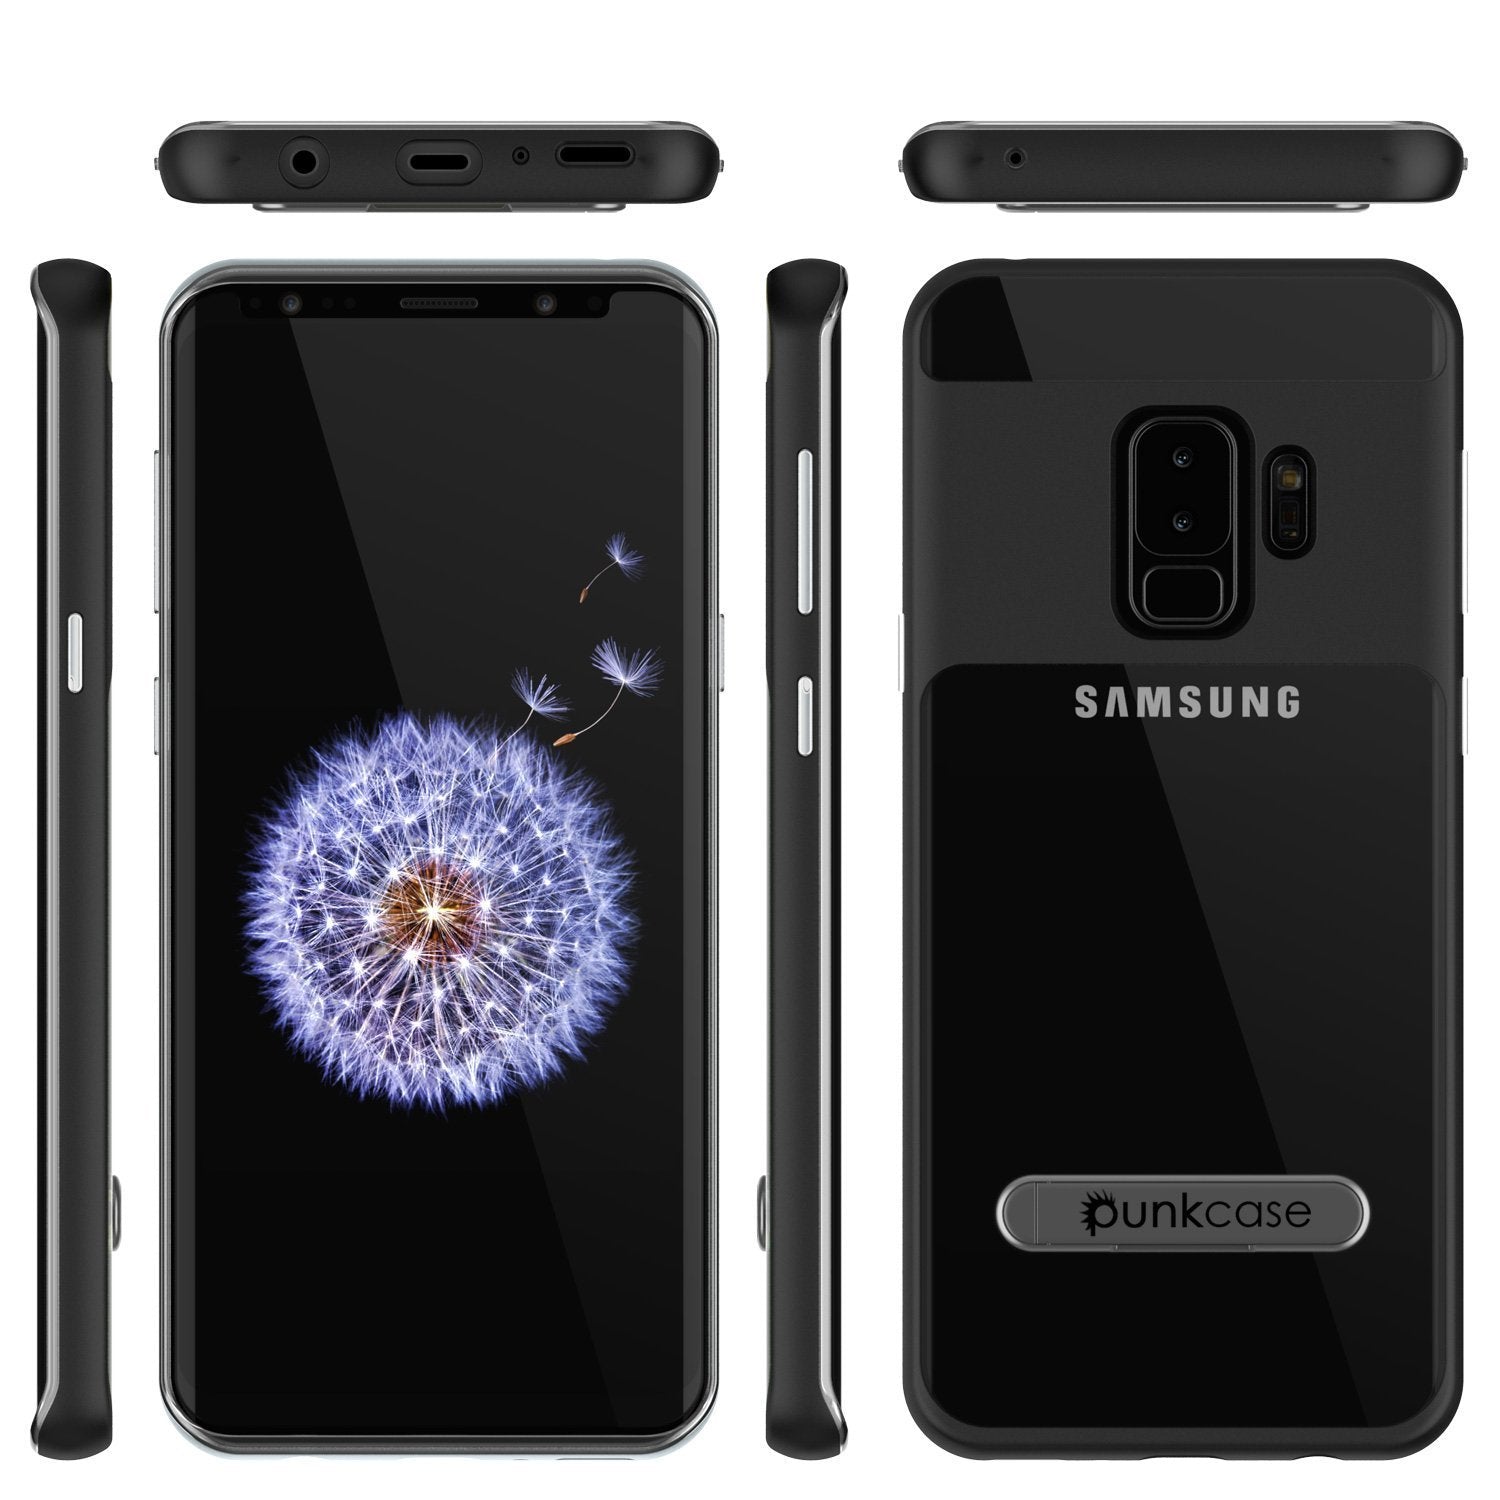 Galaxy S9+ Plus Case, PUNKcase [LUCID 3.0 Series] [Slim Fit] [Clear Back] Armor Cover w/ Integrated Kickstand, Anti-Shock System & PUNKSHIELD Screen Protector for Samsung Galaxy S9+ Plus [Black] - PunkCase NZ